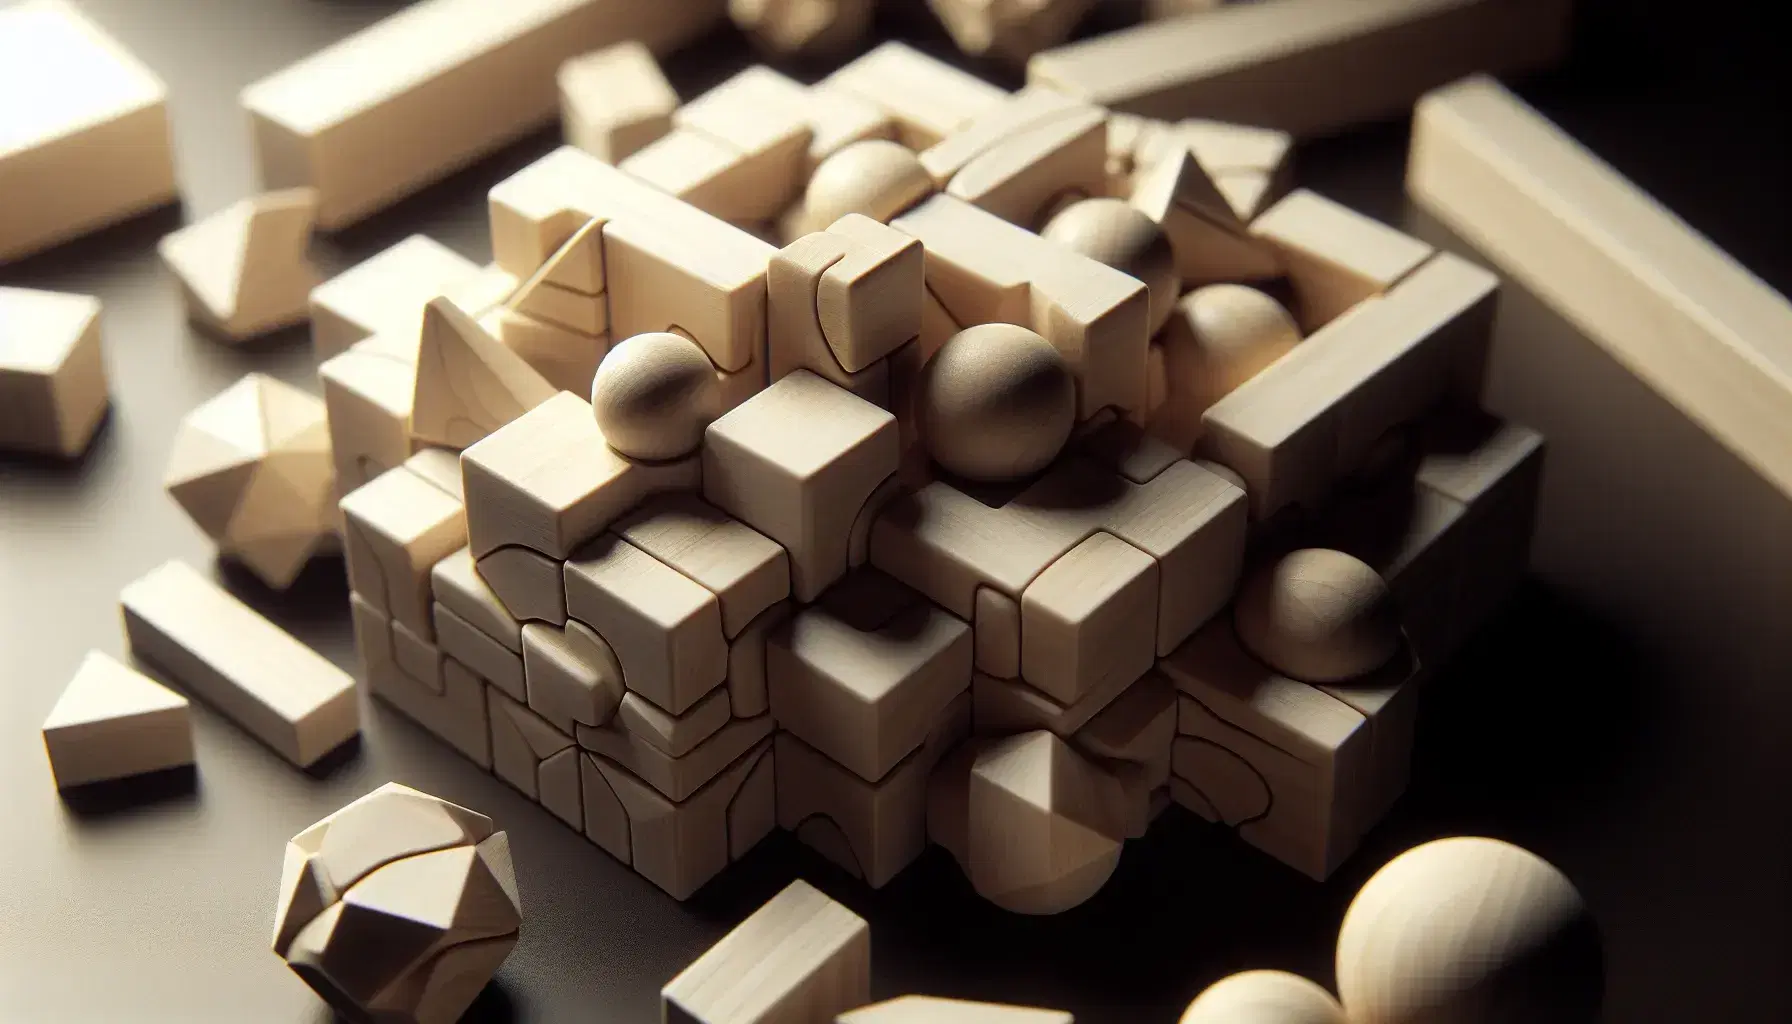 Close-up of a three-dimensional wooden puzzle with interlocking pieces, some assembled and others scattered on a black background.